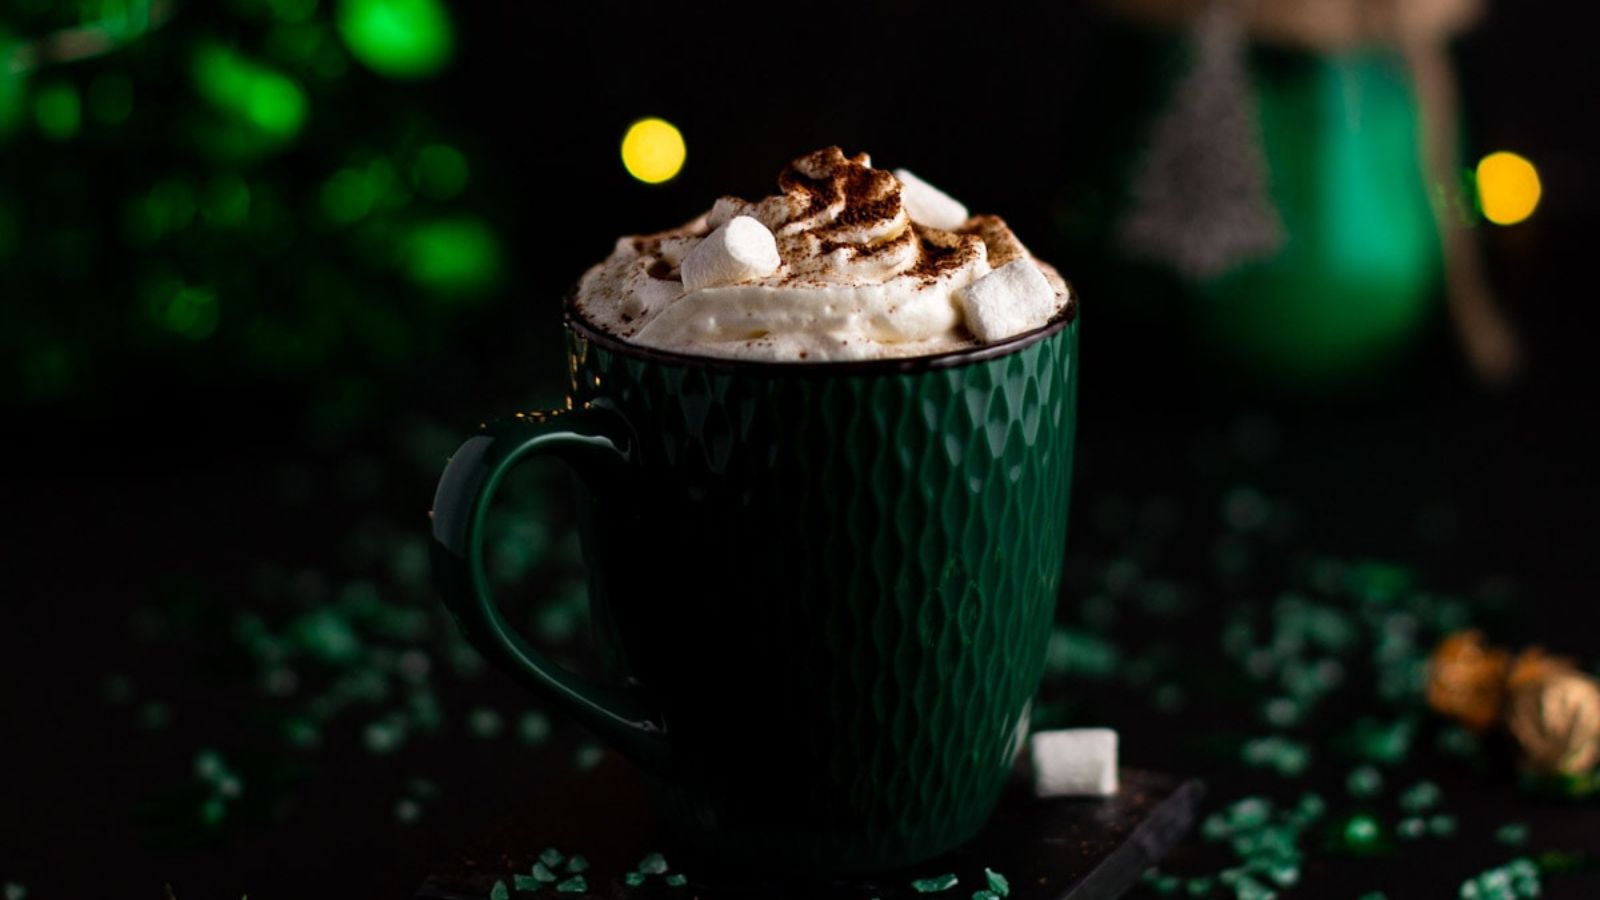 A mug of hot chocolate, topped with whipped cream and marshmallow.